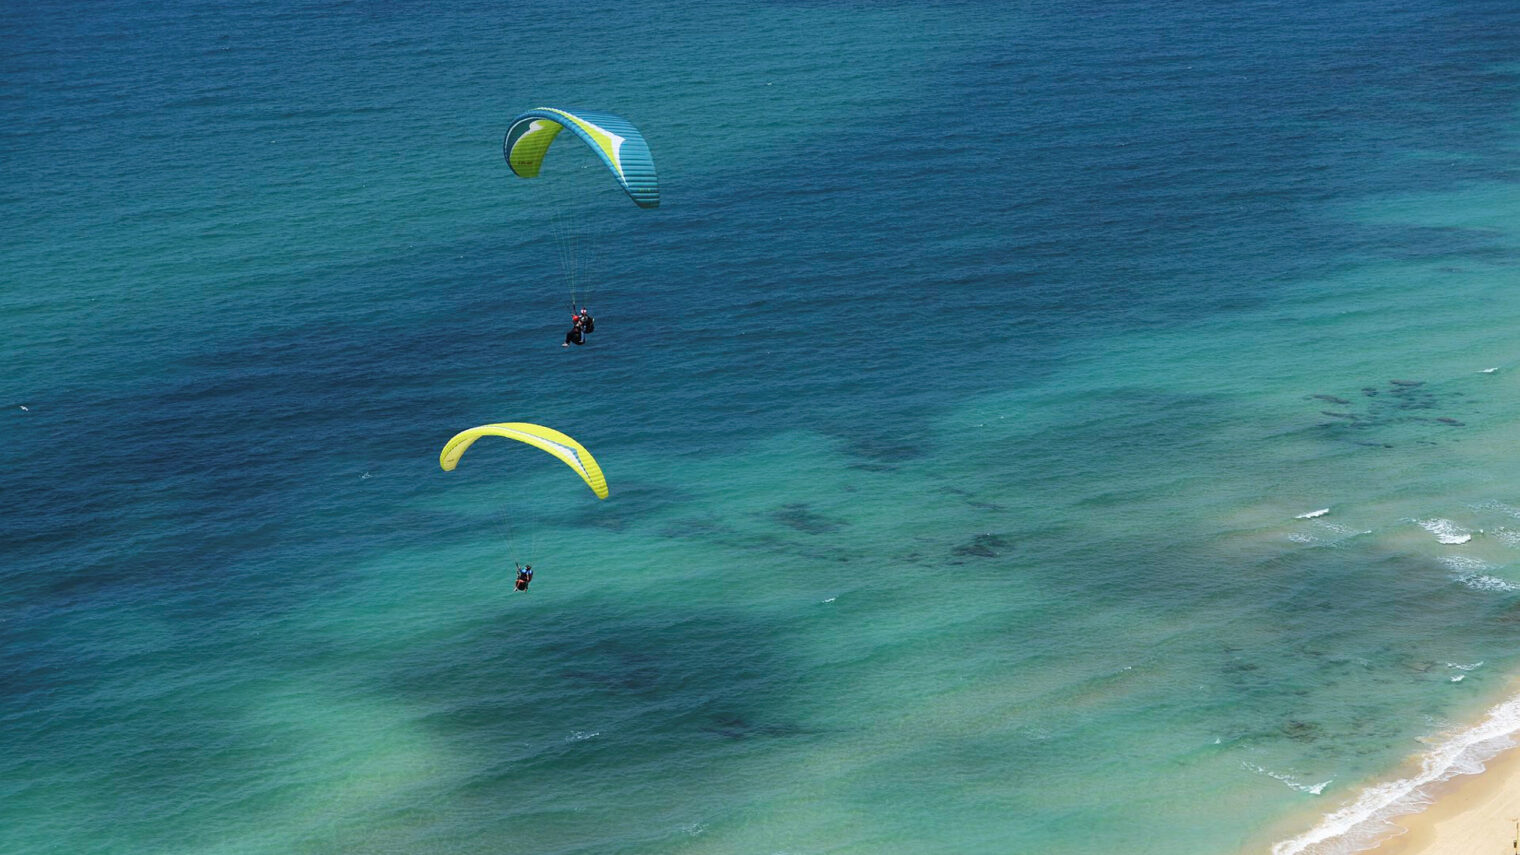 Paragliders sail quietly over the beach in Netanya. Photo by Mendy Hechtman/Flash90